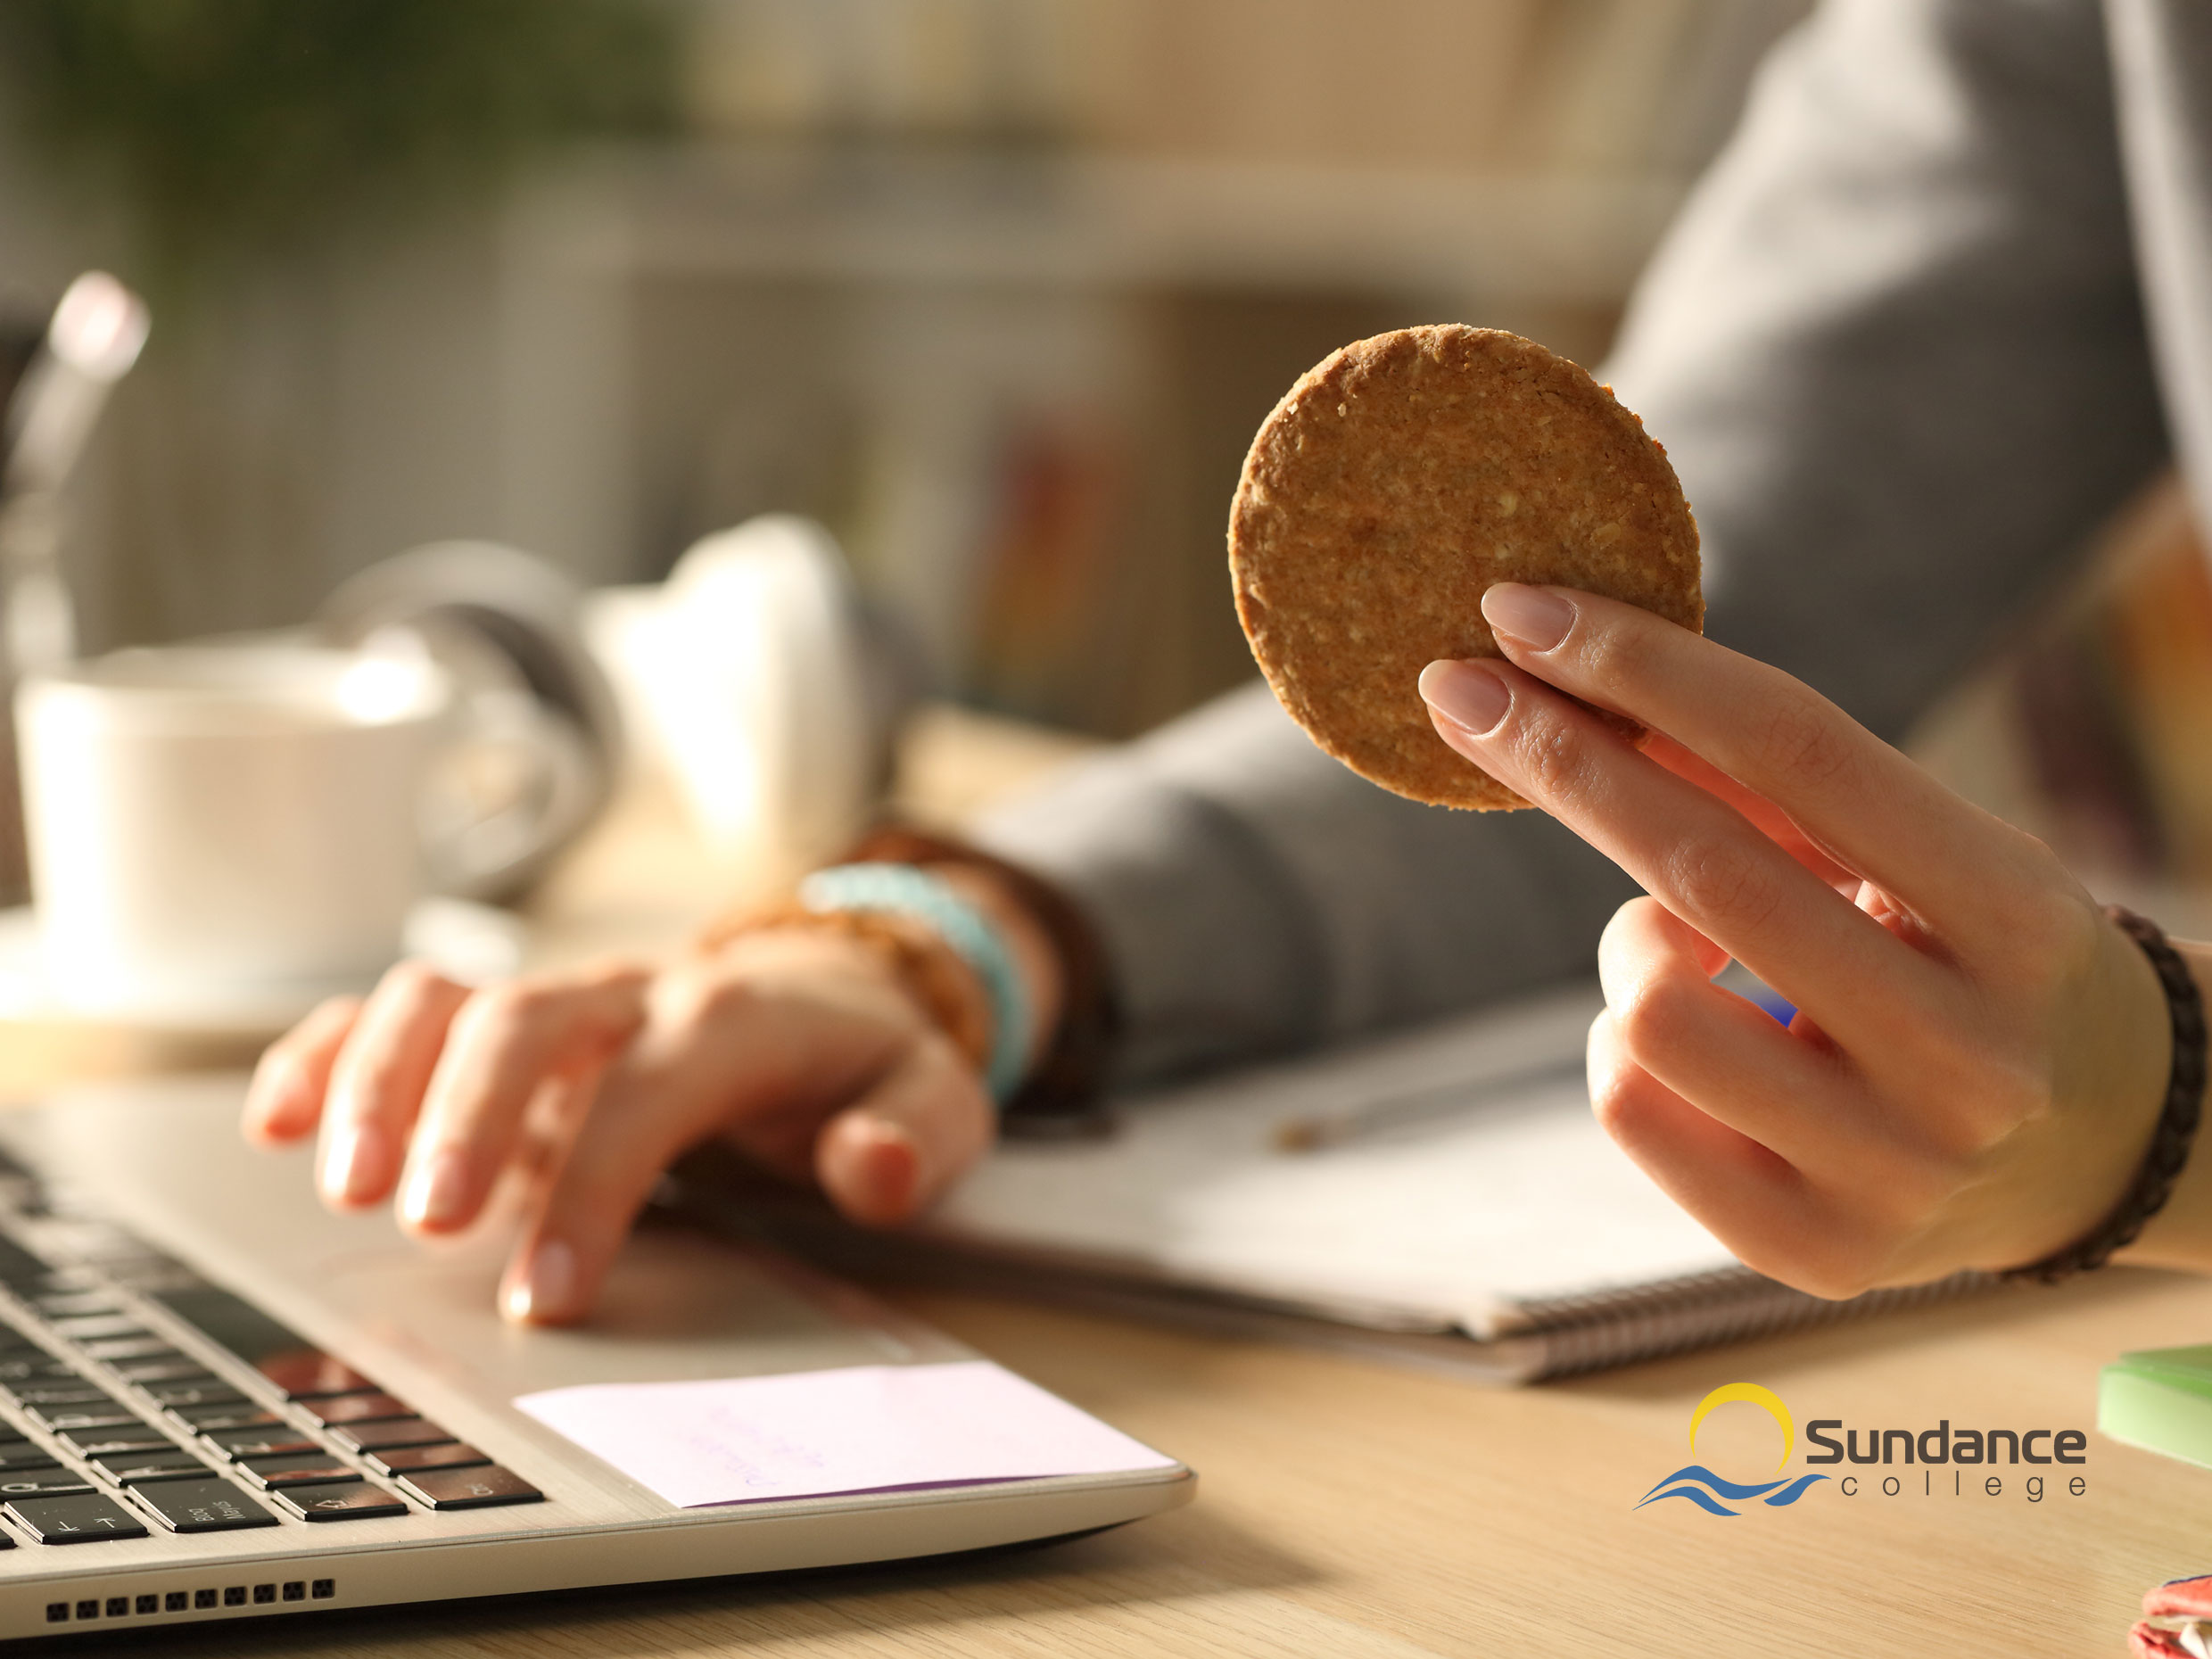 Student enjoying cookie while studying online